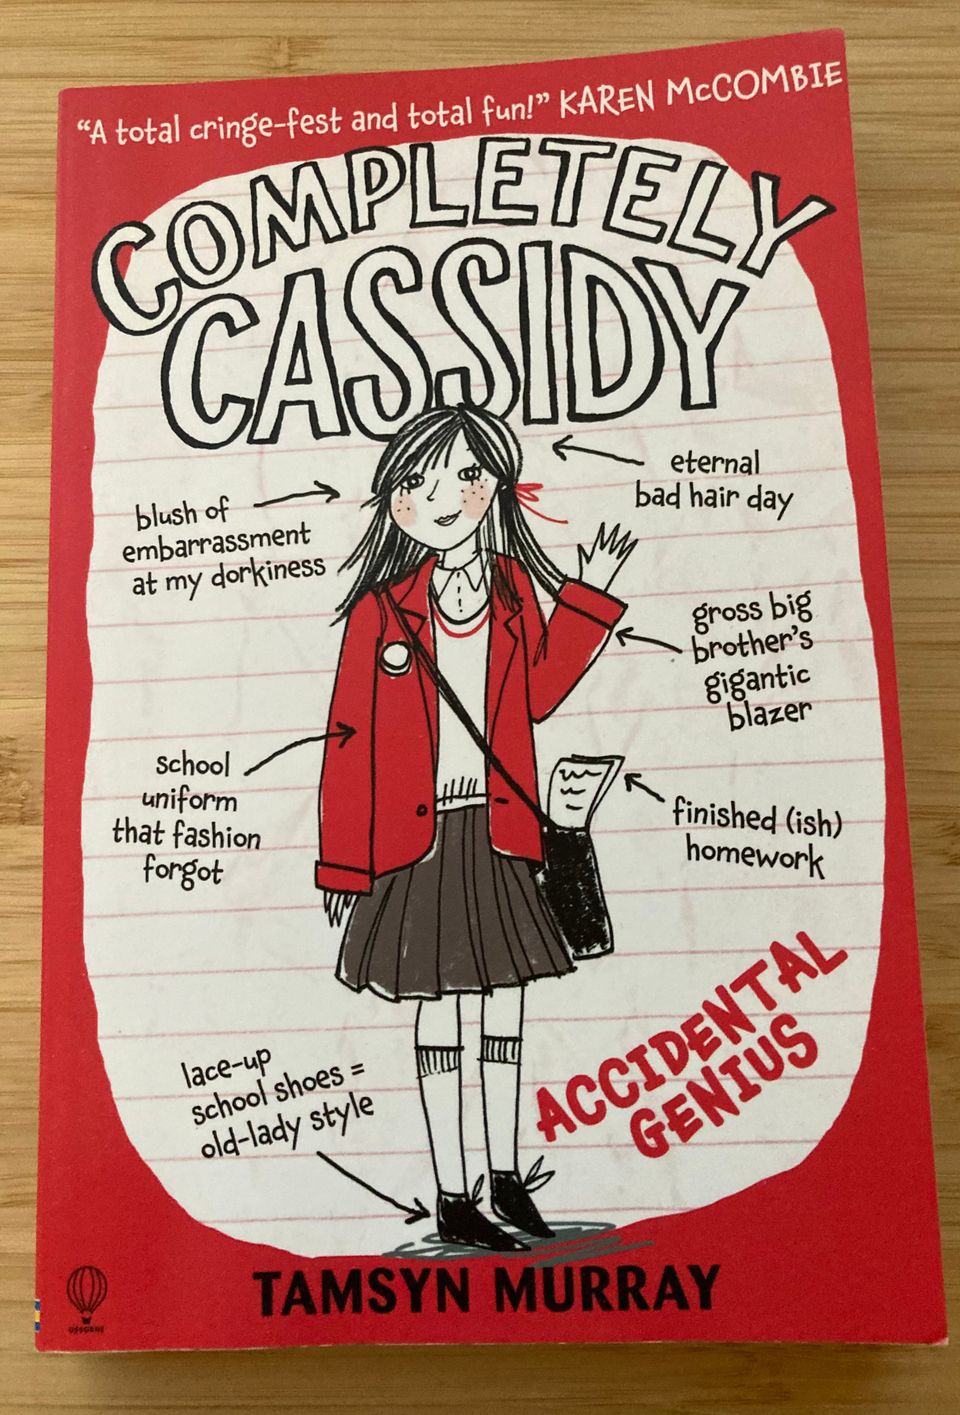 Completely Cassidy